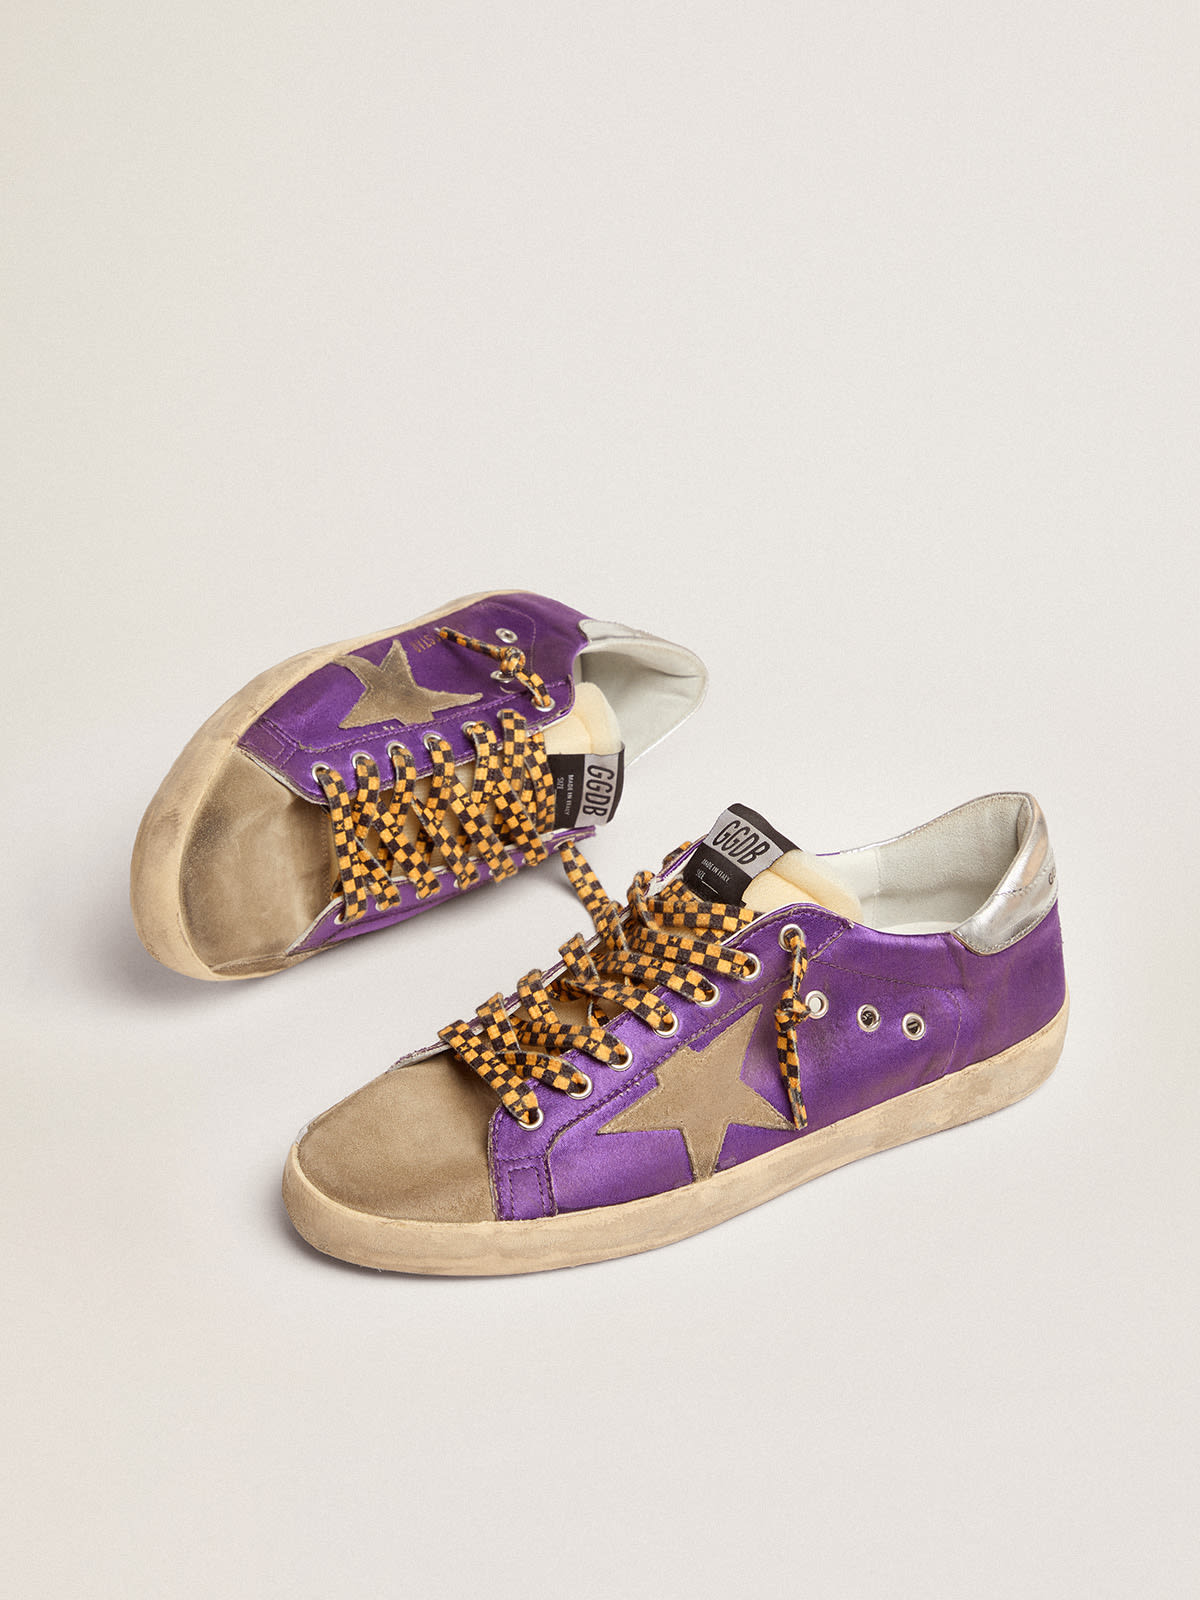 Golden Goose - Super-Star sneakers in purple satin with dove-gray suede star   in 